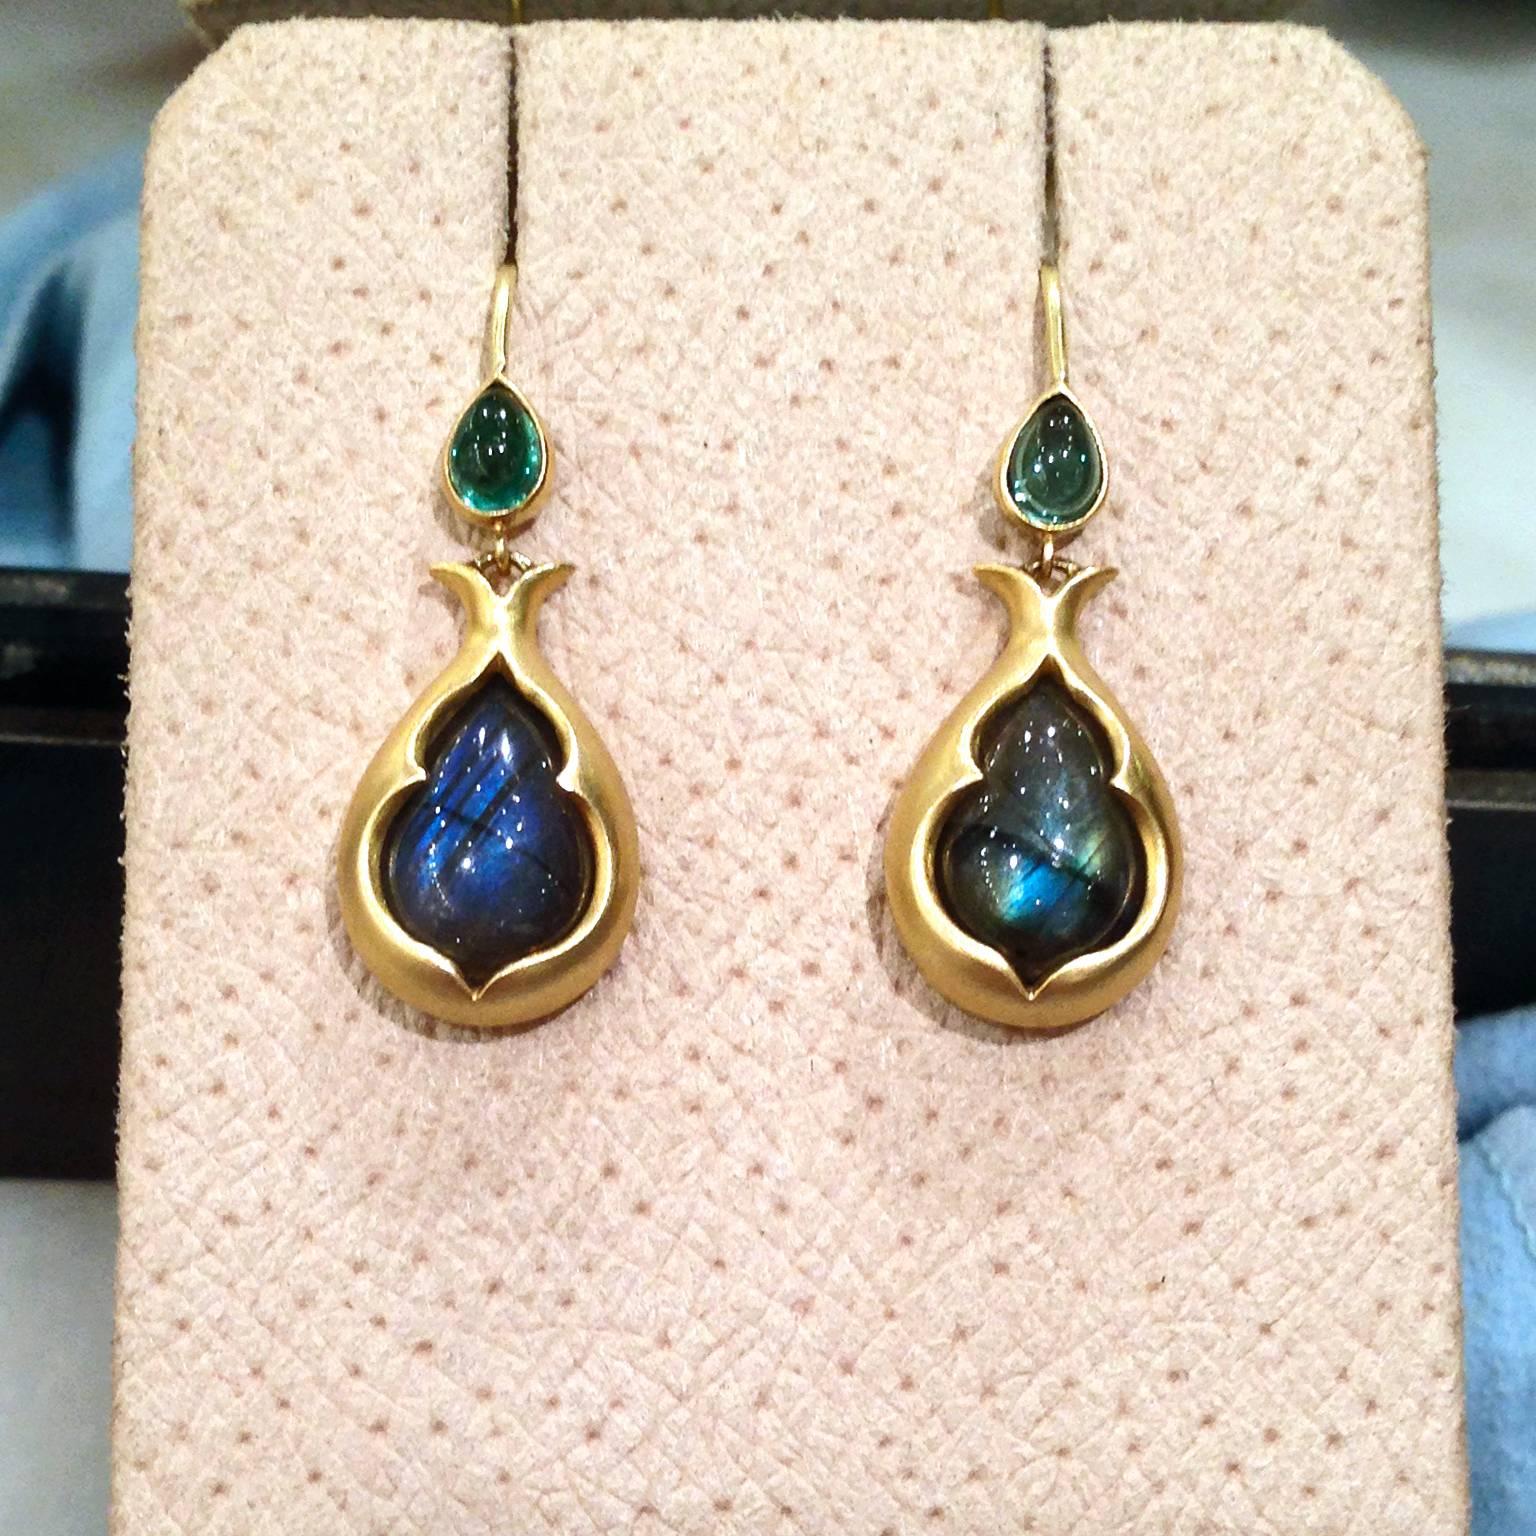 Motif Dangle Drop Earrings handcrafted in 2015 by jewelry artist Ana Stein in matte-finished 18k yellow gold with two stunning pear-shaped, cabochon-cut labradorite drops showcasing brilliant blue and green labradorescence, and accented with two